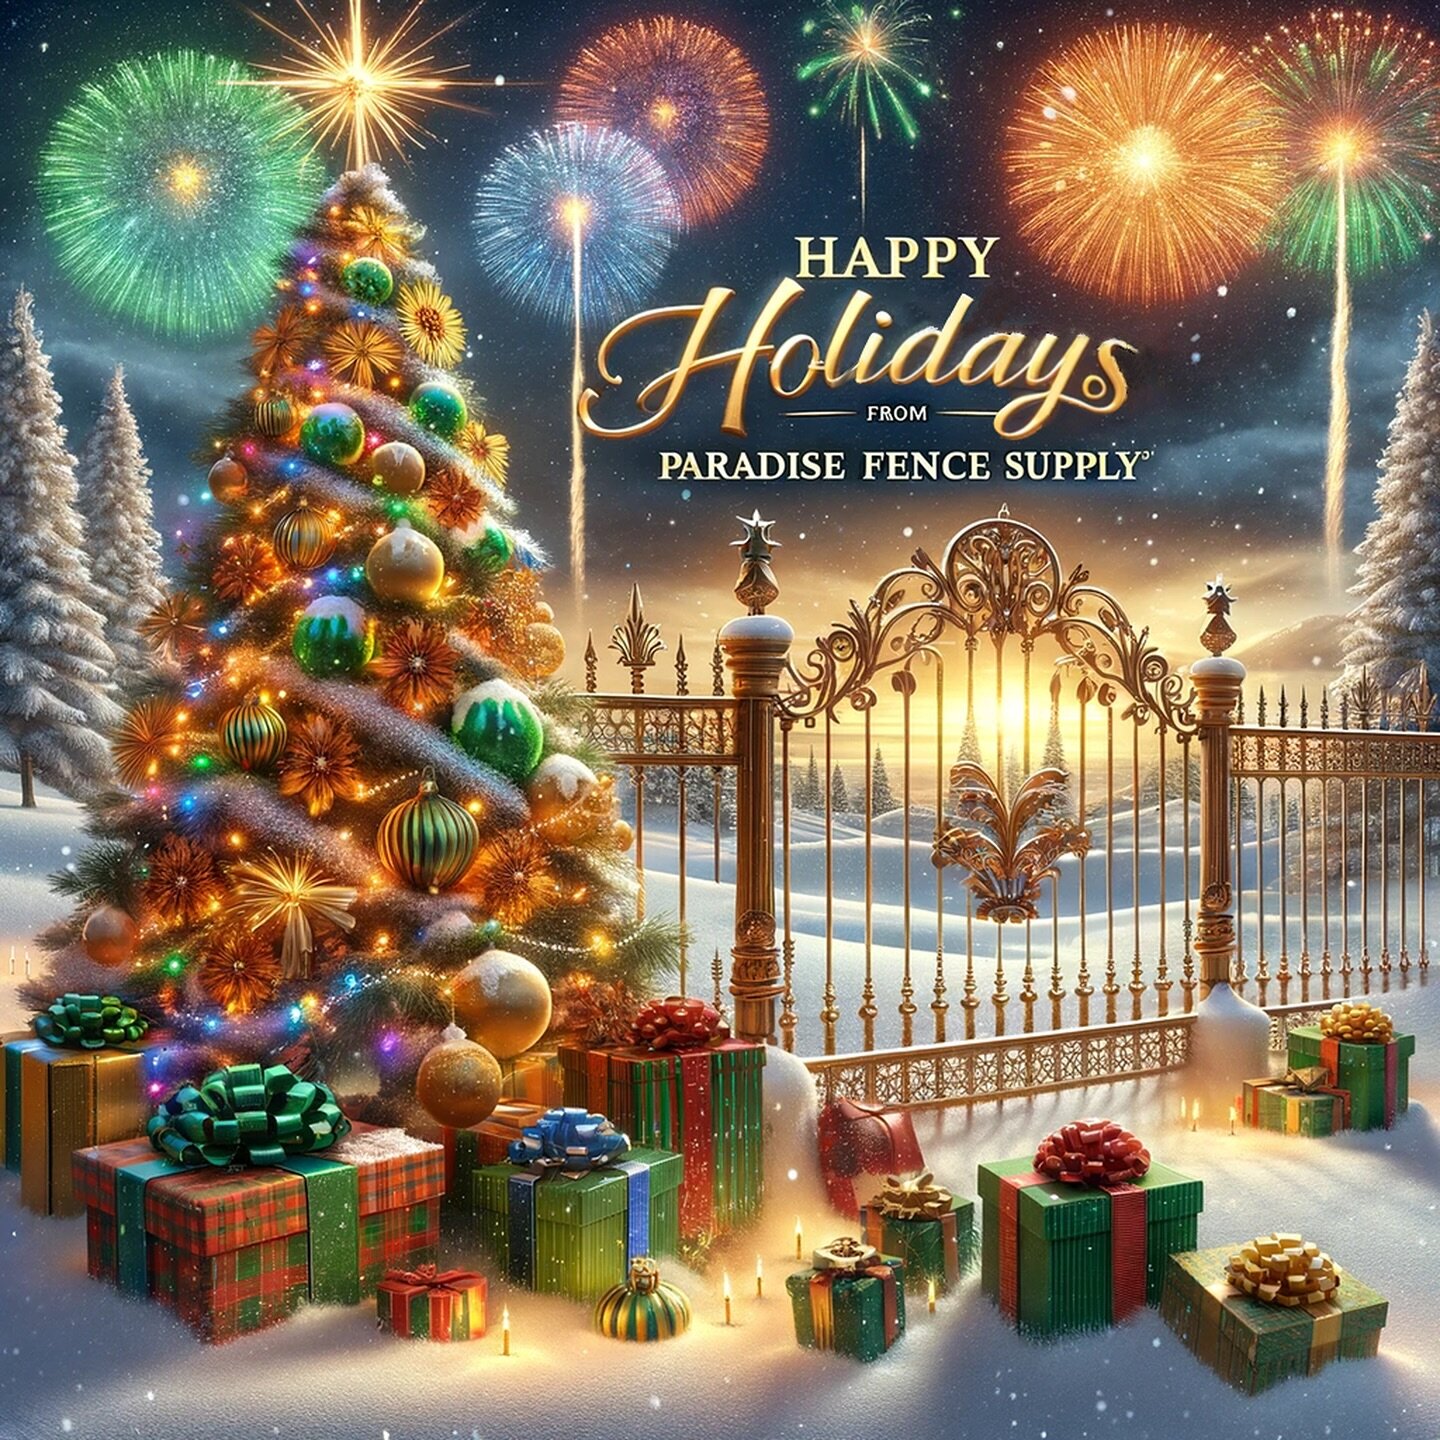 Happy Holidays from Paradise Fence Supply! Thank you for your support throughout the year. Wishing you joy, peace, and prosperity this festive season and in the year ahead. From all of us at Paradise Fence Supply, we look forward to continuing our jo